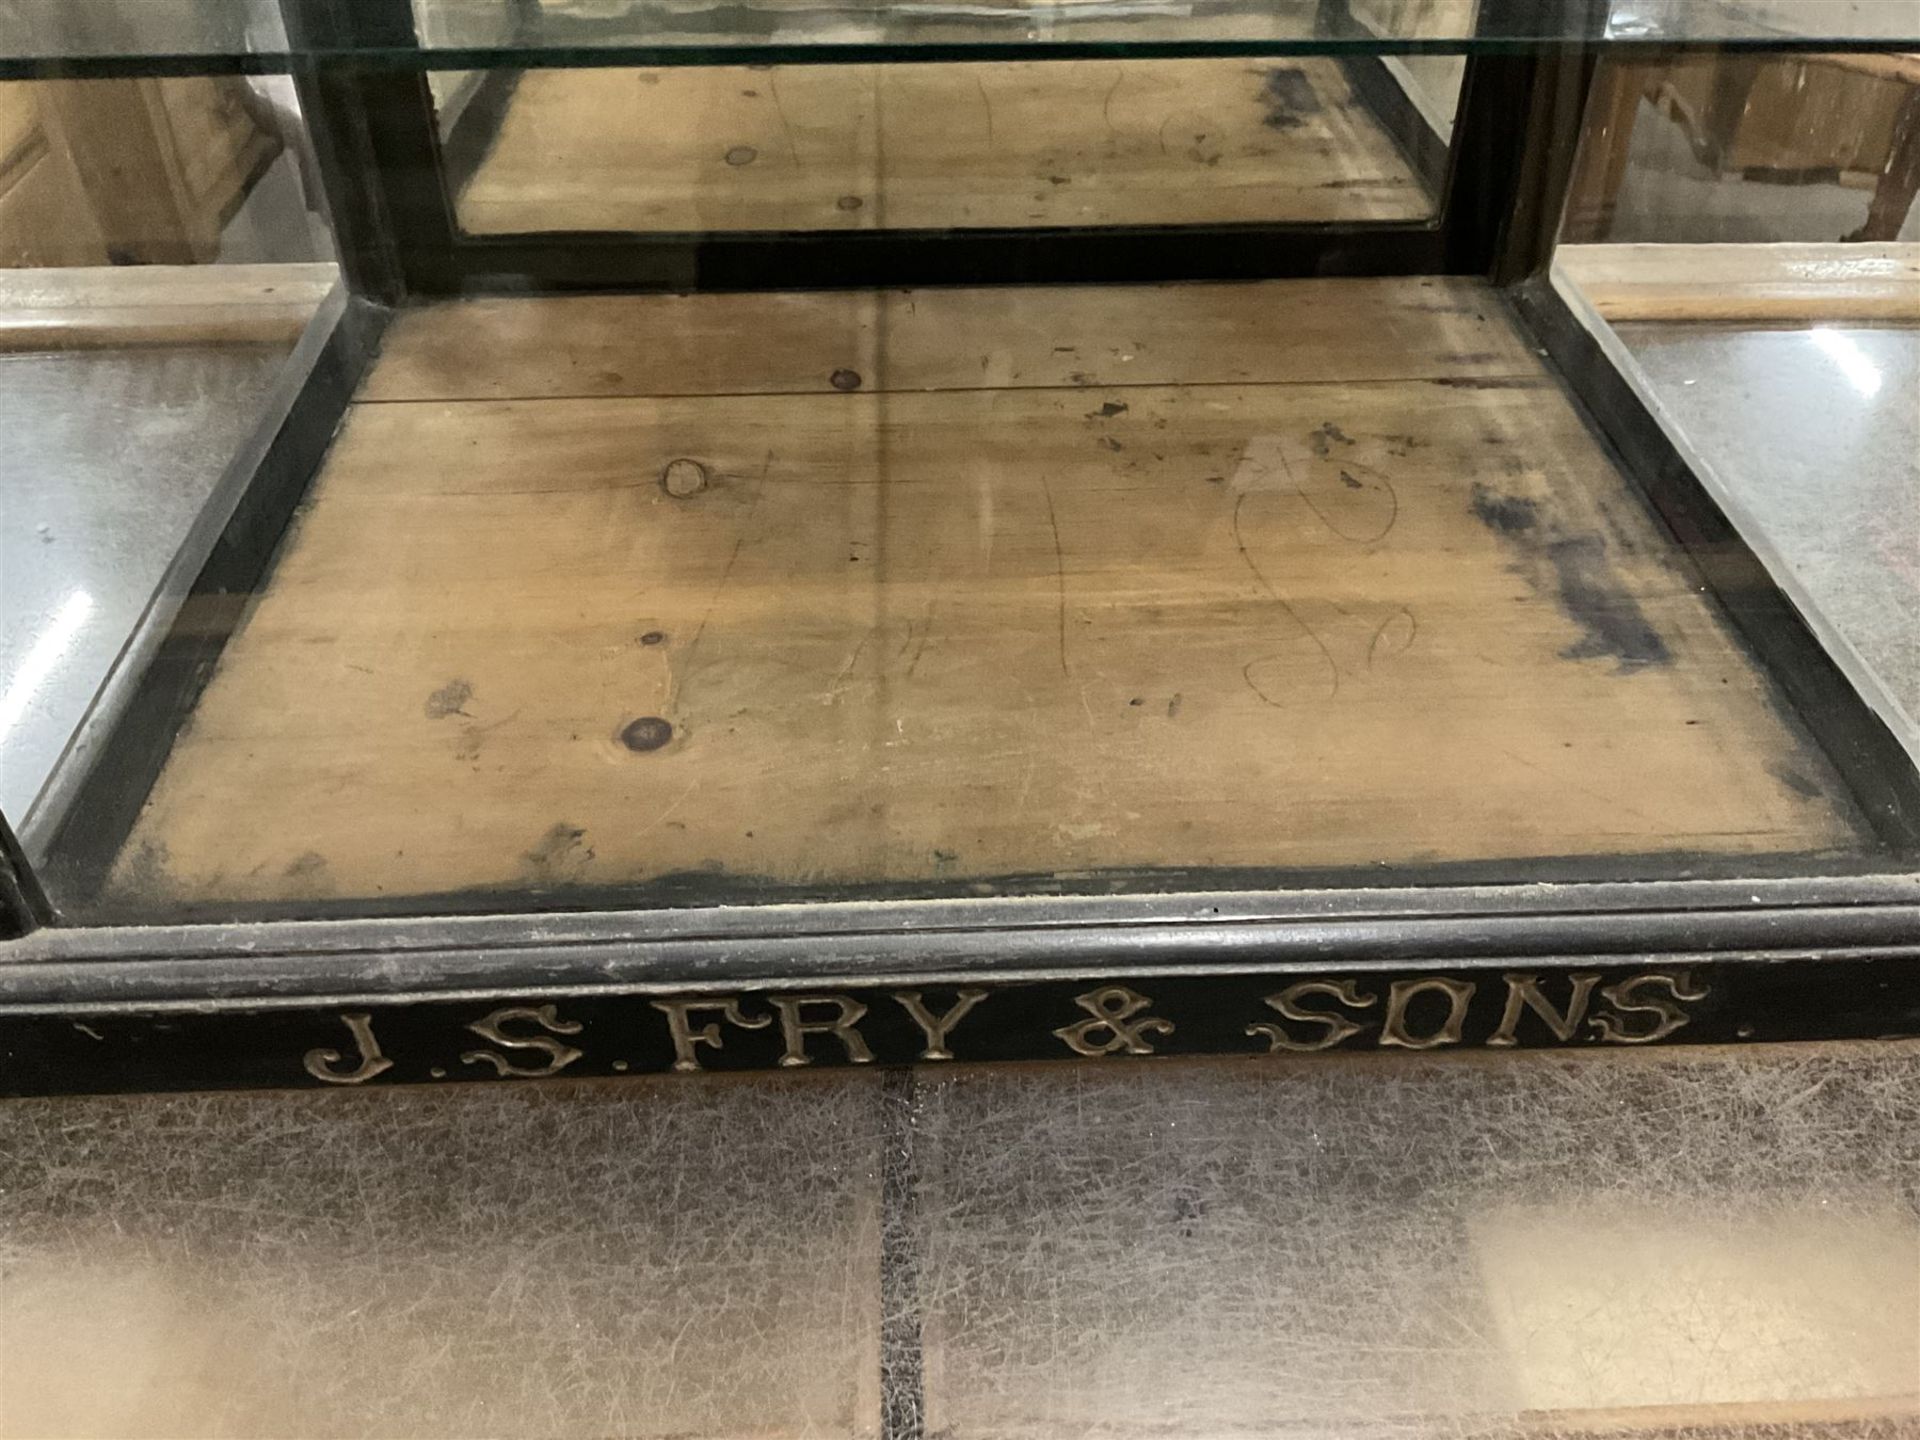 J S Fry & Sons - Victorian glazed and ebonised chocolate countertop display cabinet - Image 2 of 5